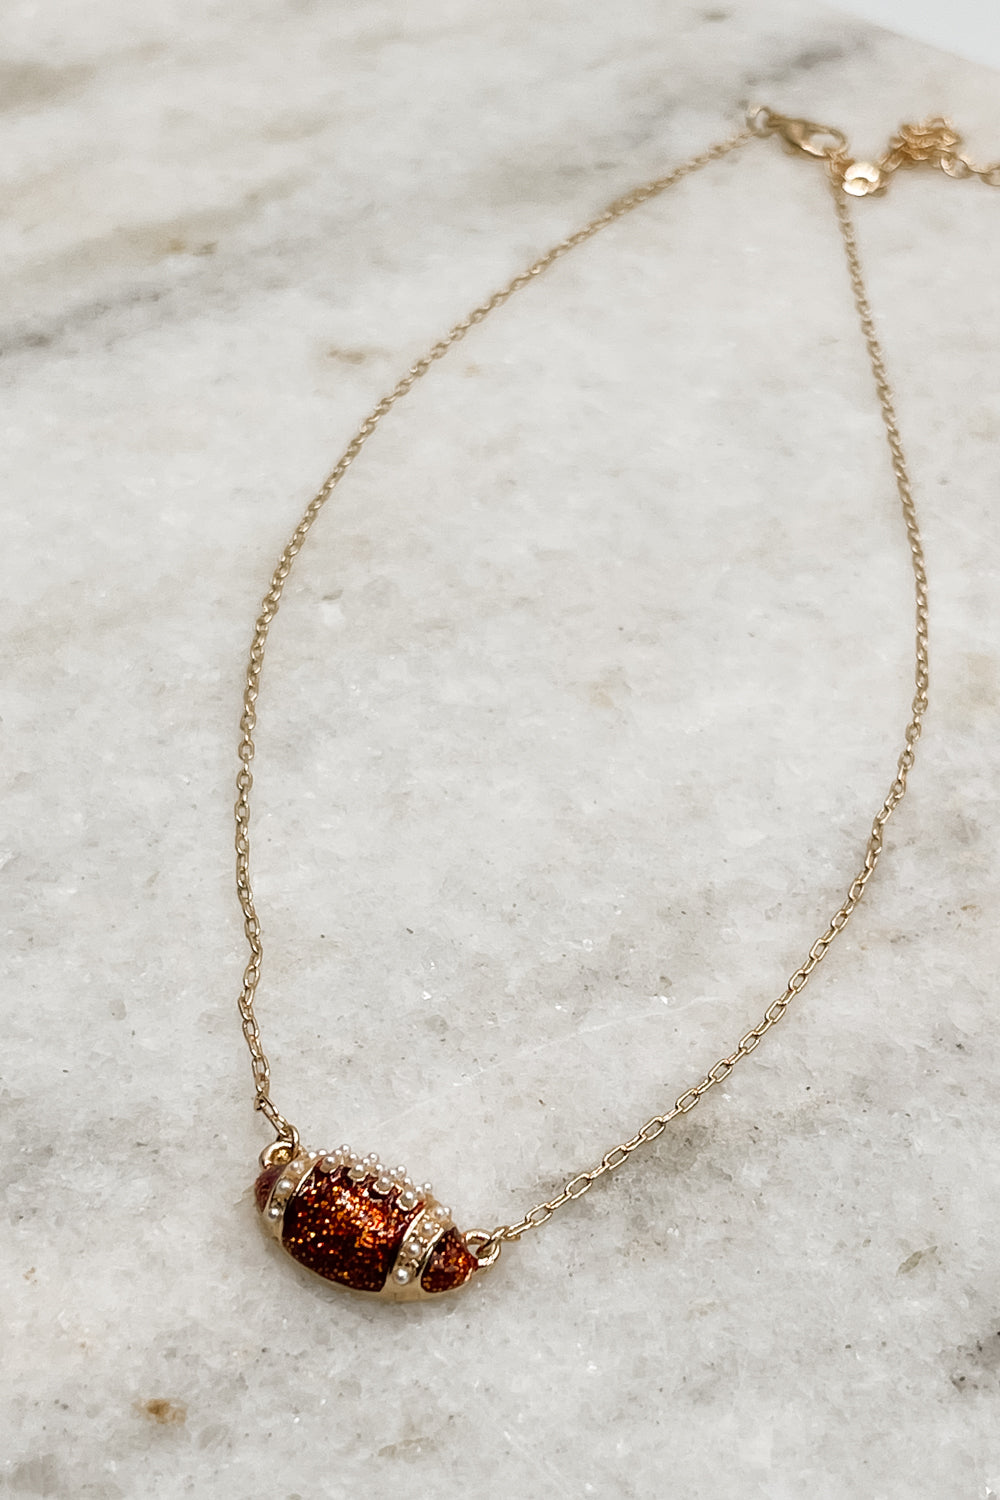 Image shows the Abby Gold Football Pendant Necklace against a marble background. Necklace features thin gold chain and a sparkly brown football pendant with pearl and gold detailing.